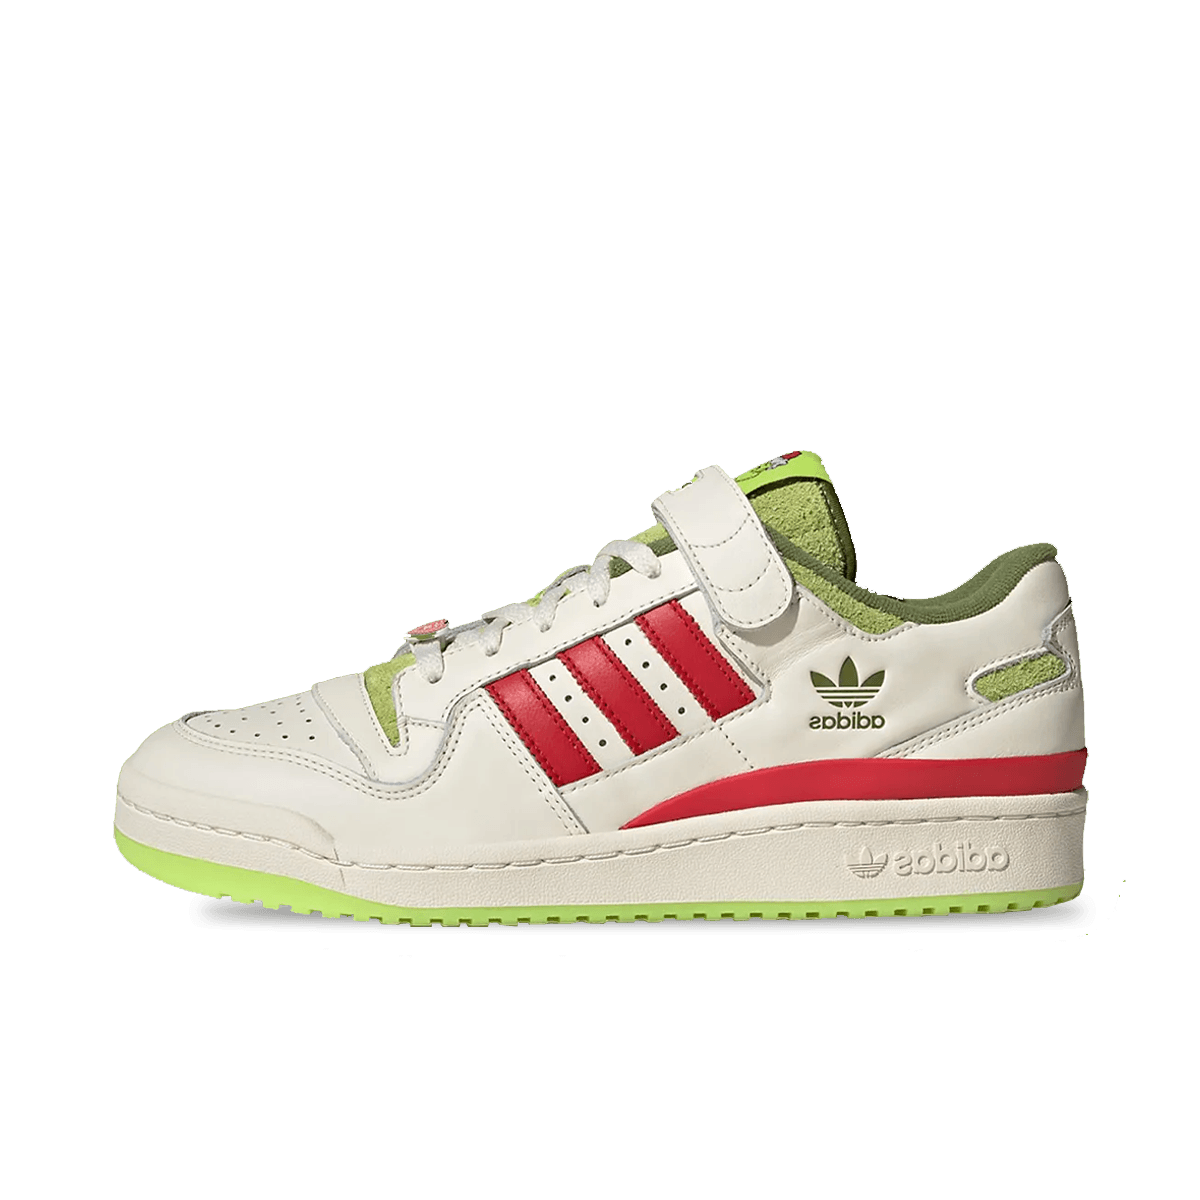 The Grinch x adidas Forum Low 'Cream Whiite'